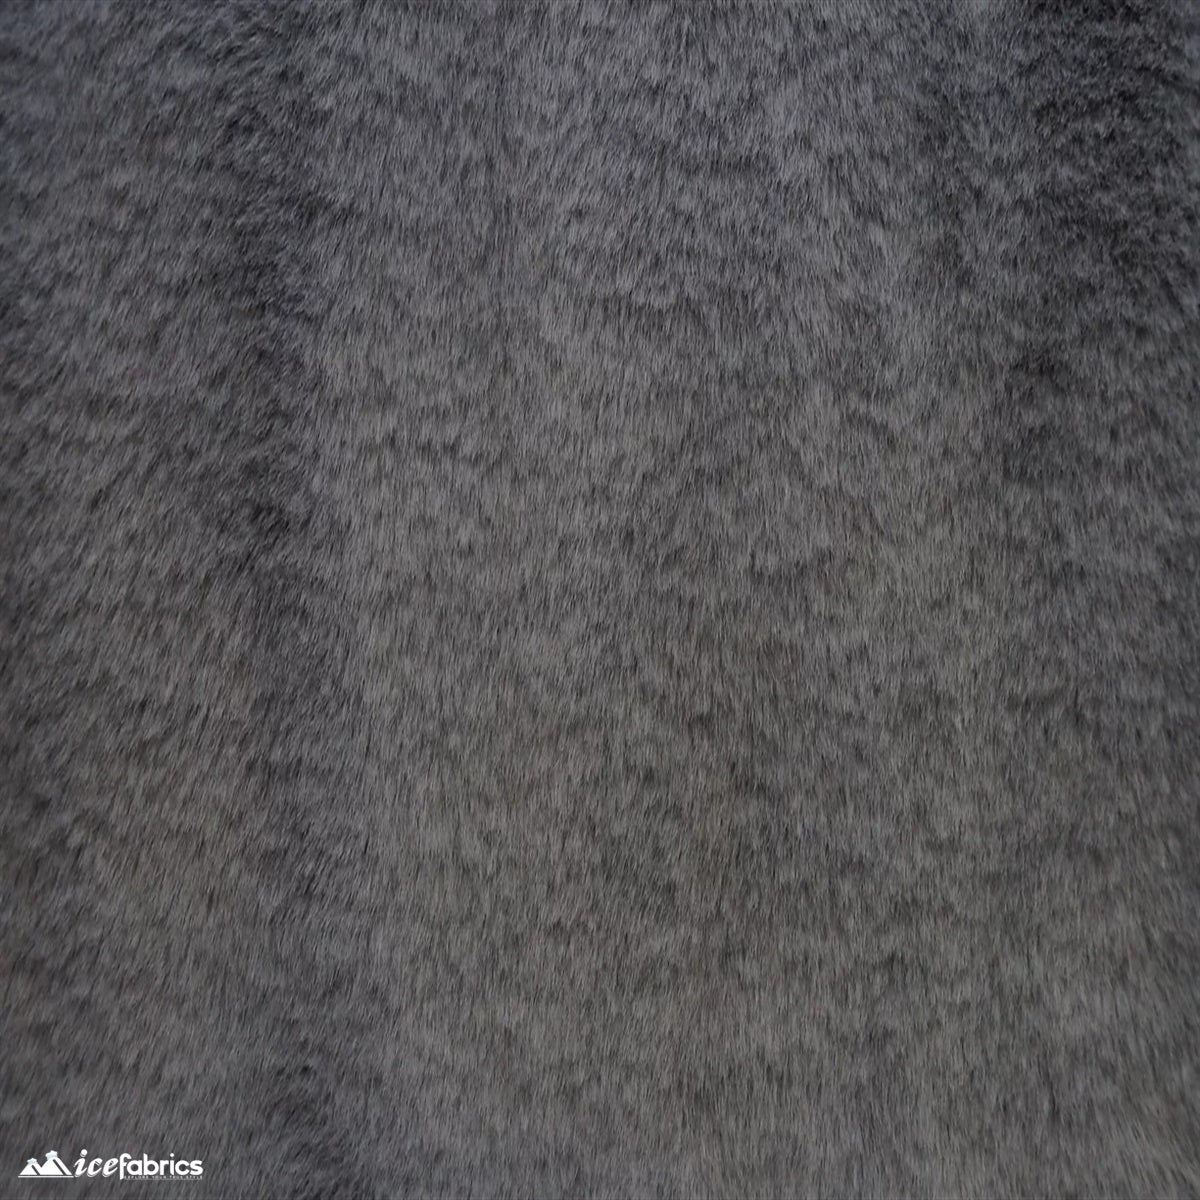 Bunny Thick Faux Fur Minky Fabric / Short Pile / Super SoftICE FABRICSICE FABRICSCharcoalBy The Yard (60 inches Wide)Bunny Thick Faux Fur Minky Fabric / Short Pile / Super Soft ICE FABRICS Charcoal